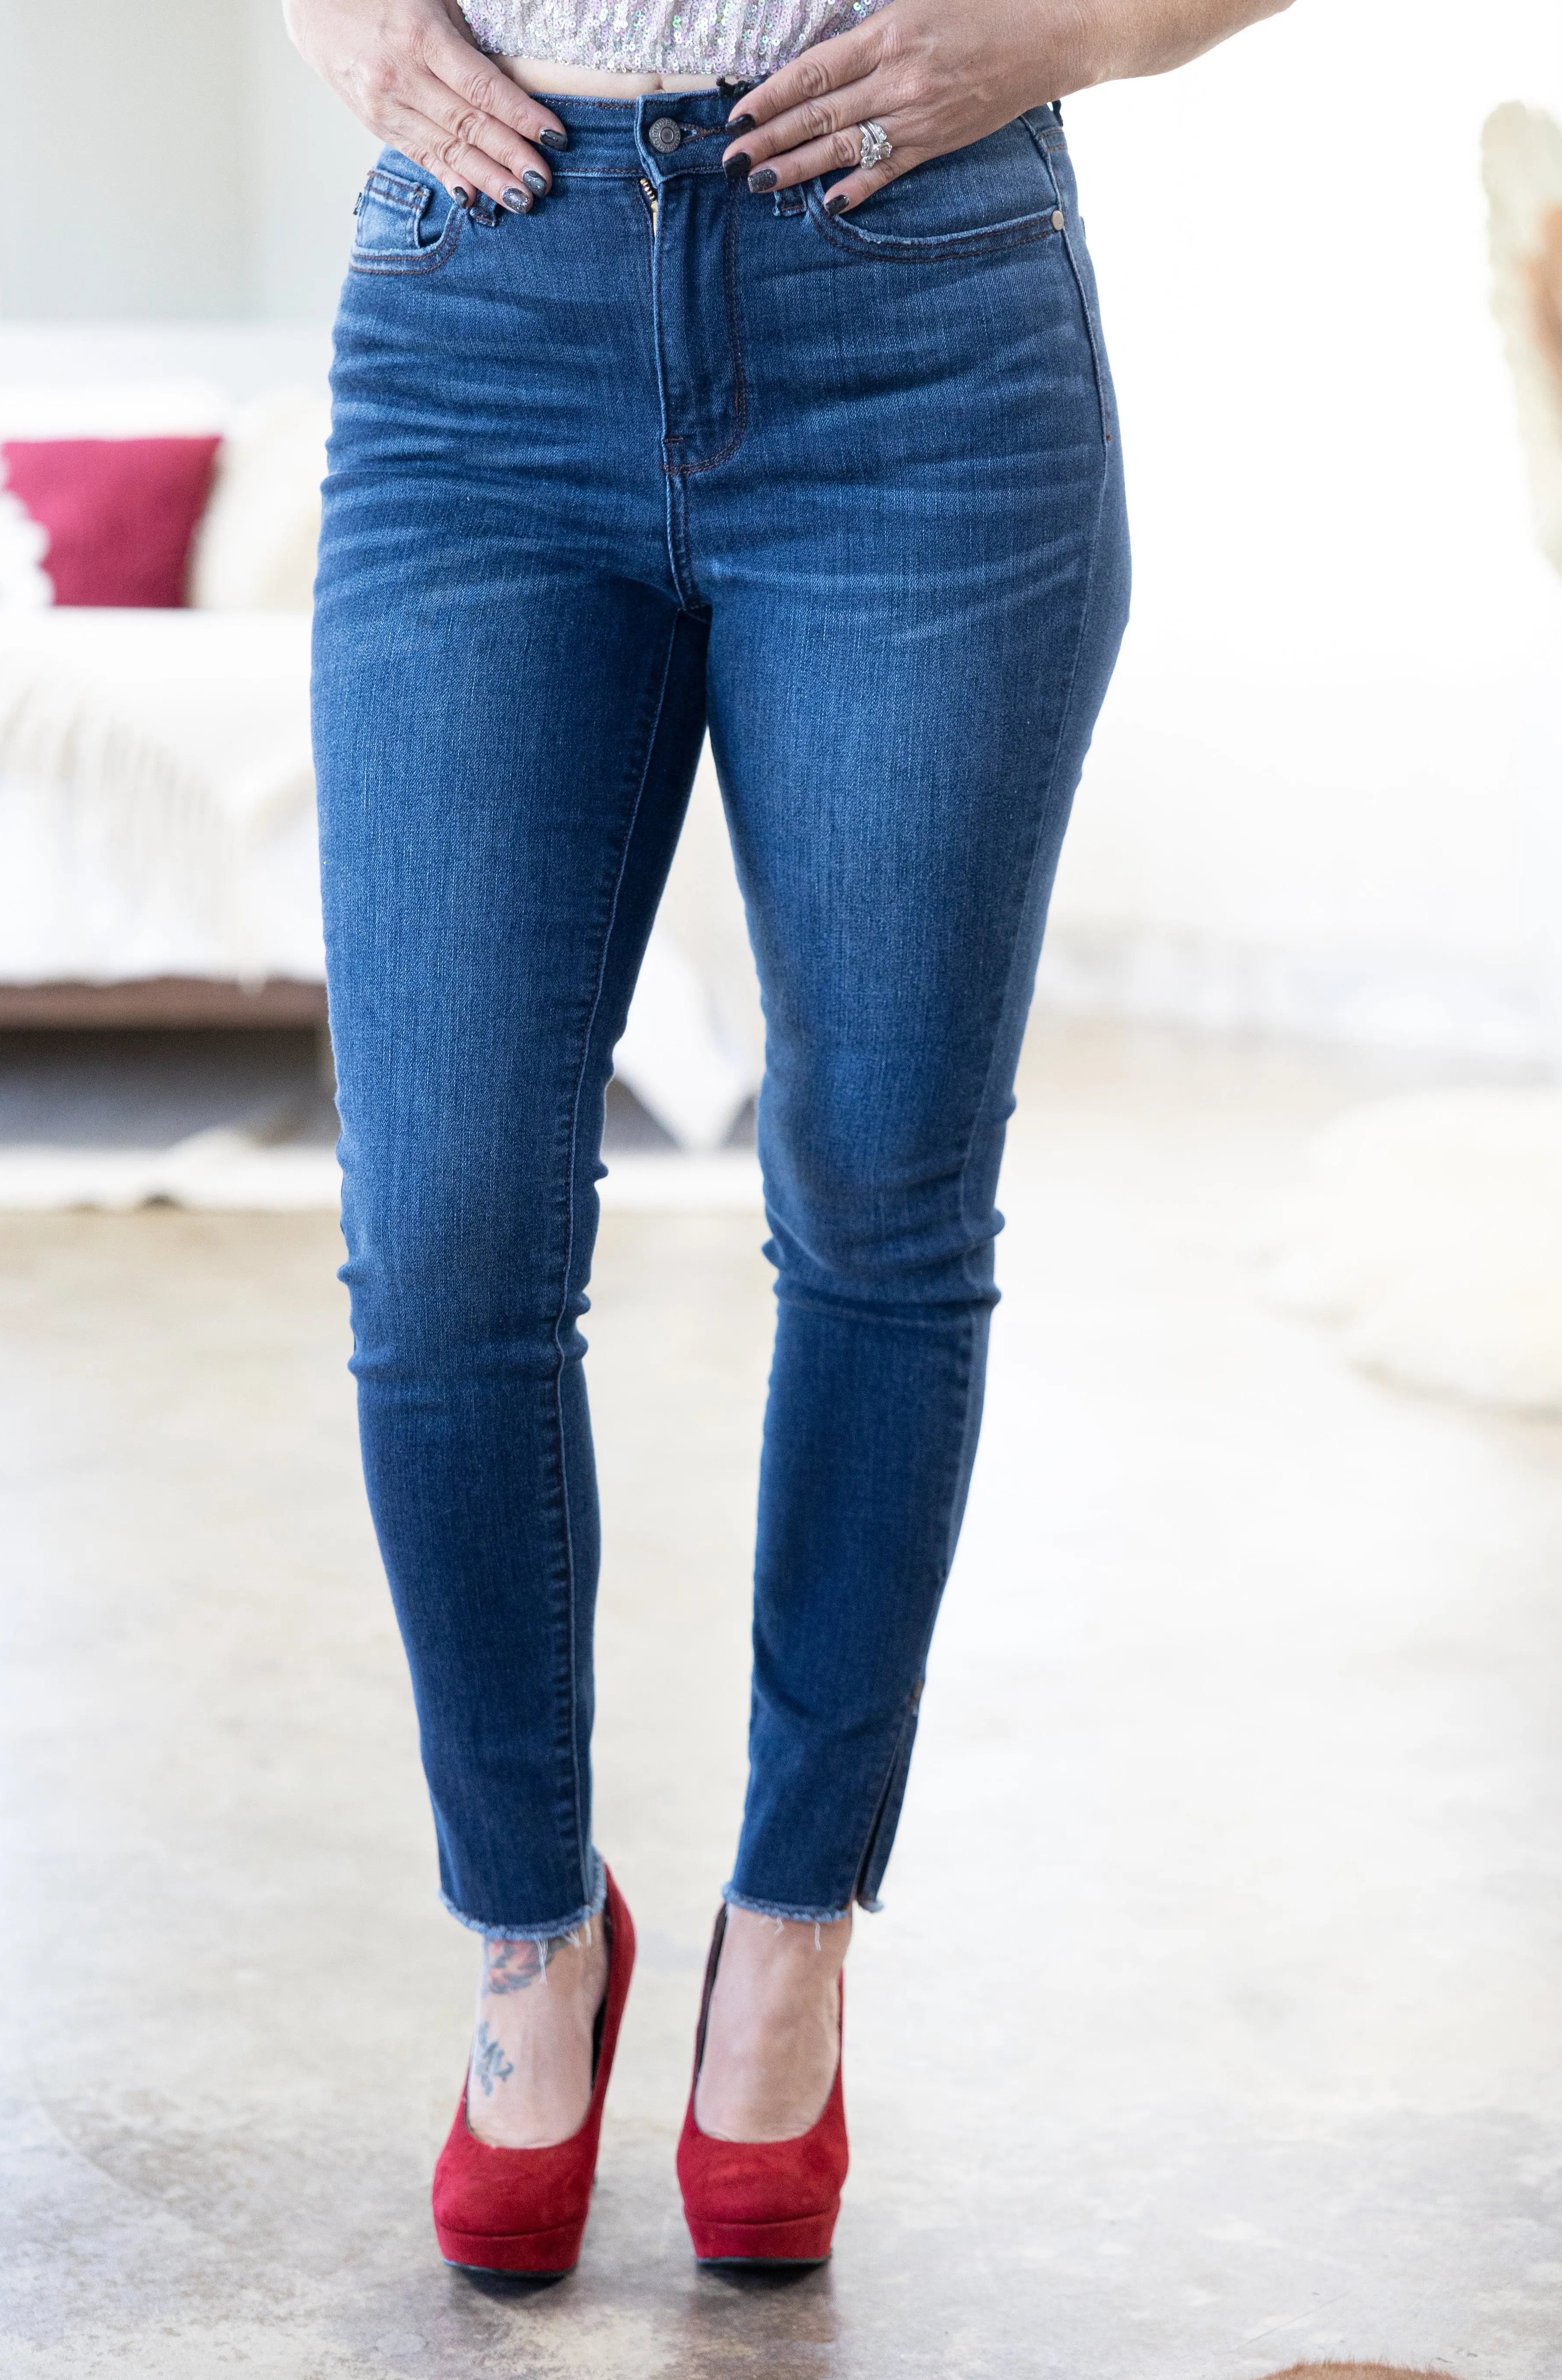 The World Is Yours - Judy Blue Skinnies JB Boutique Simplified